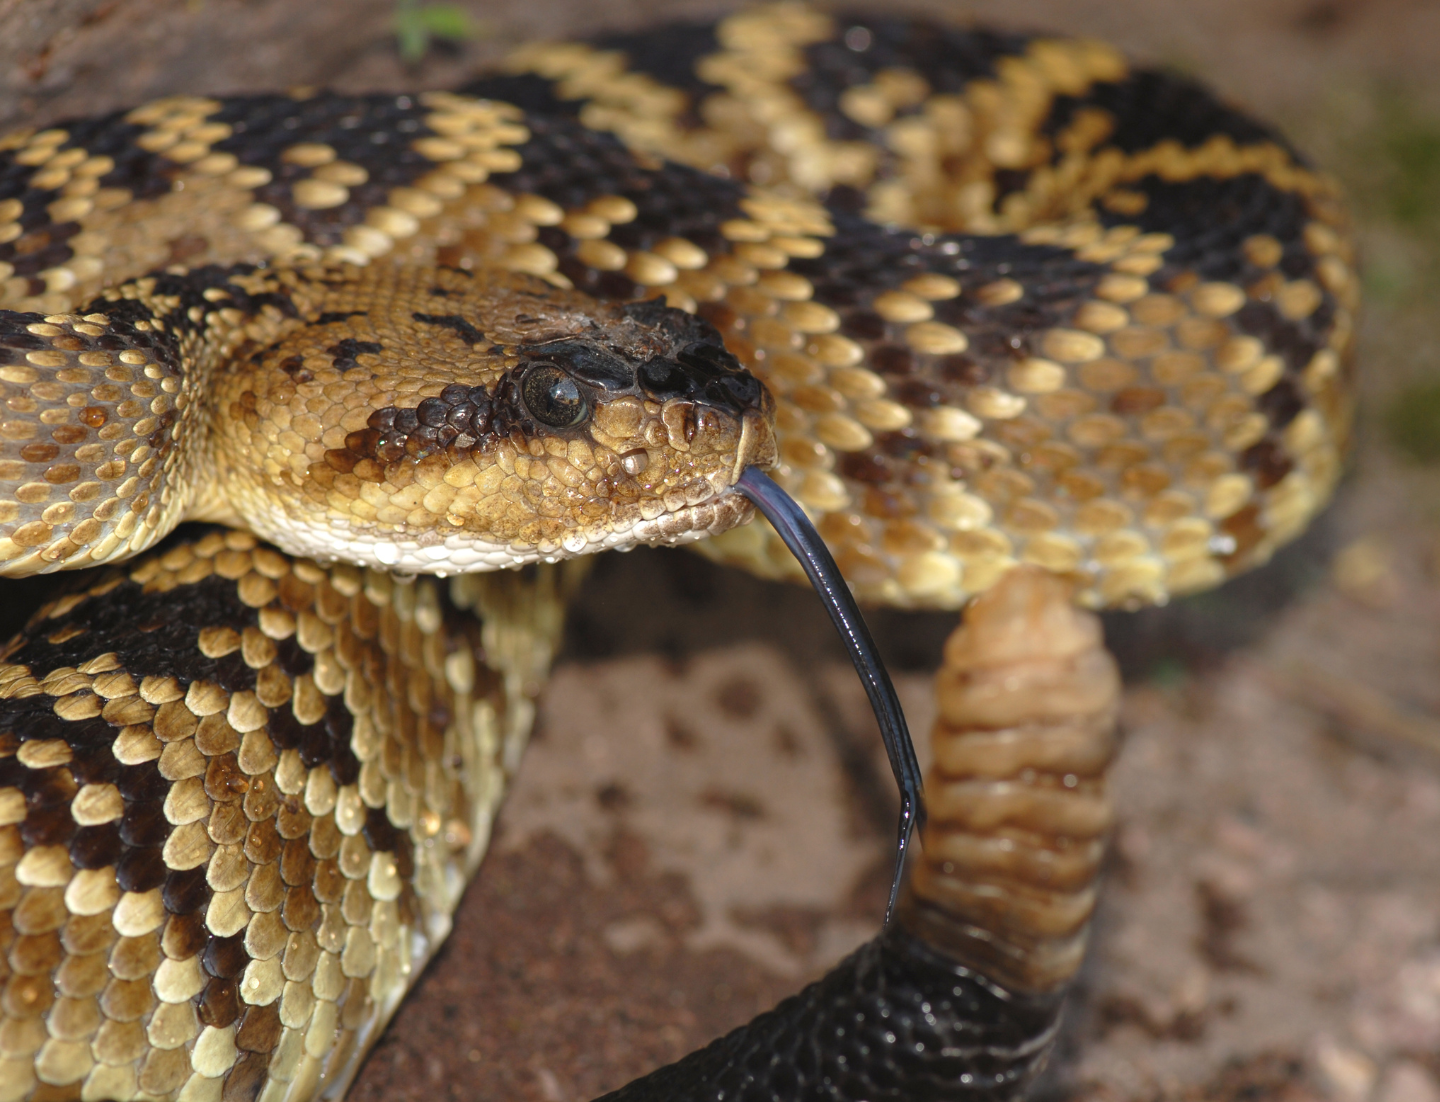 A close-up photo of the black-tailed rattlesnake in which the head with its black tongue sticking out and the rattle is visible along with the brown and olive diamond-patterned body.